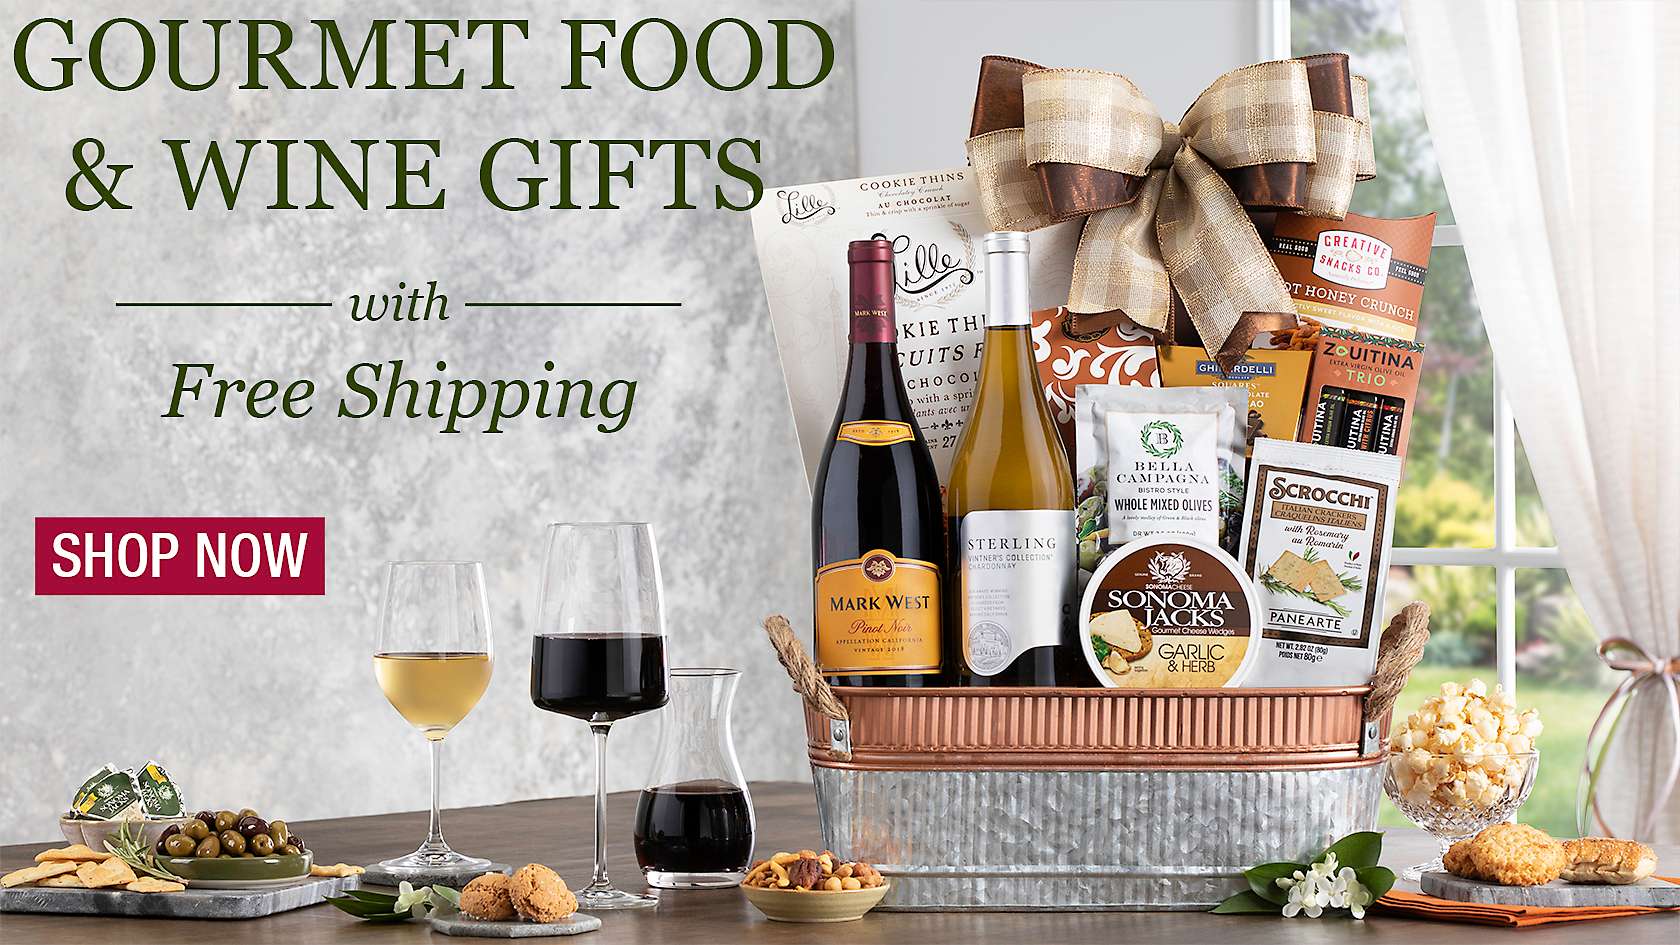 Gourmet food and wine gifts with free shipping